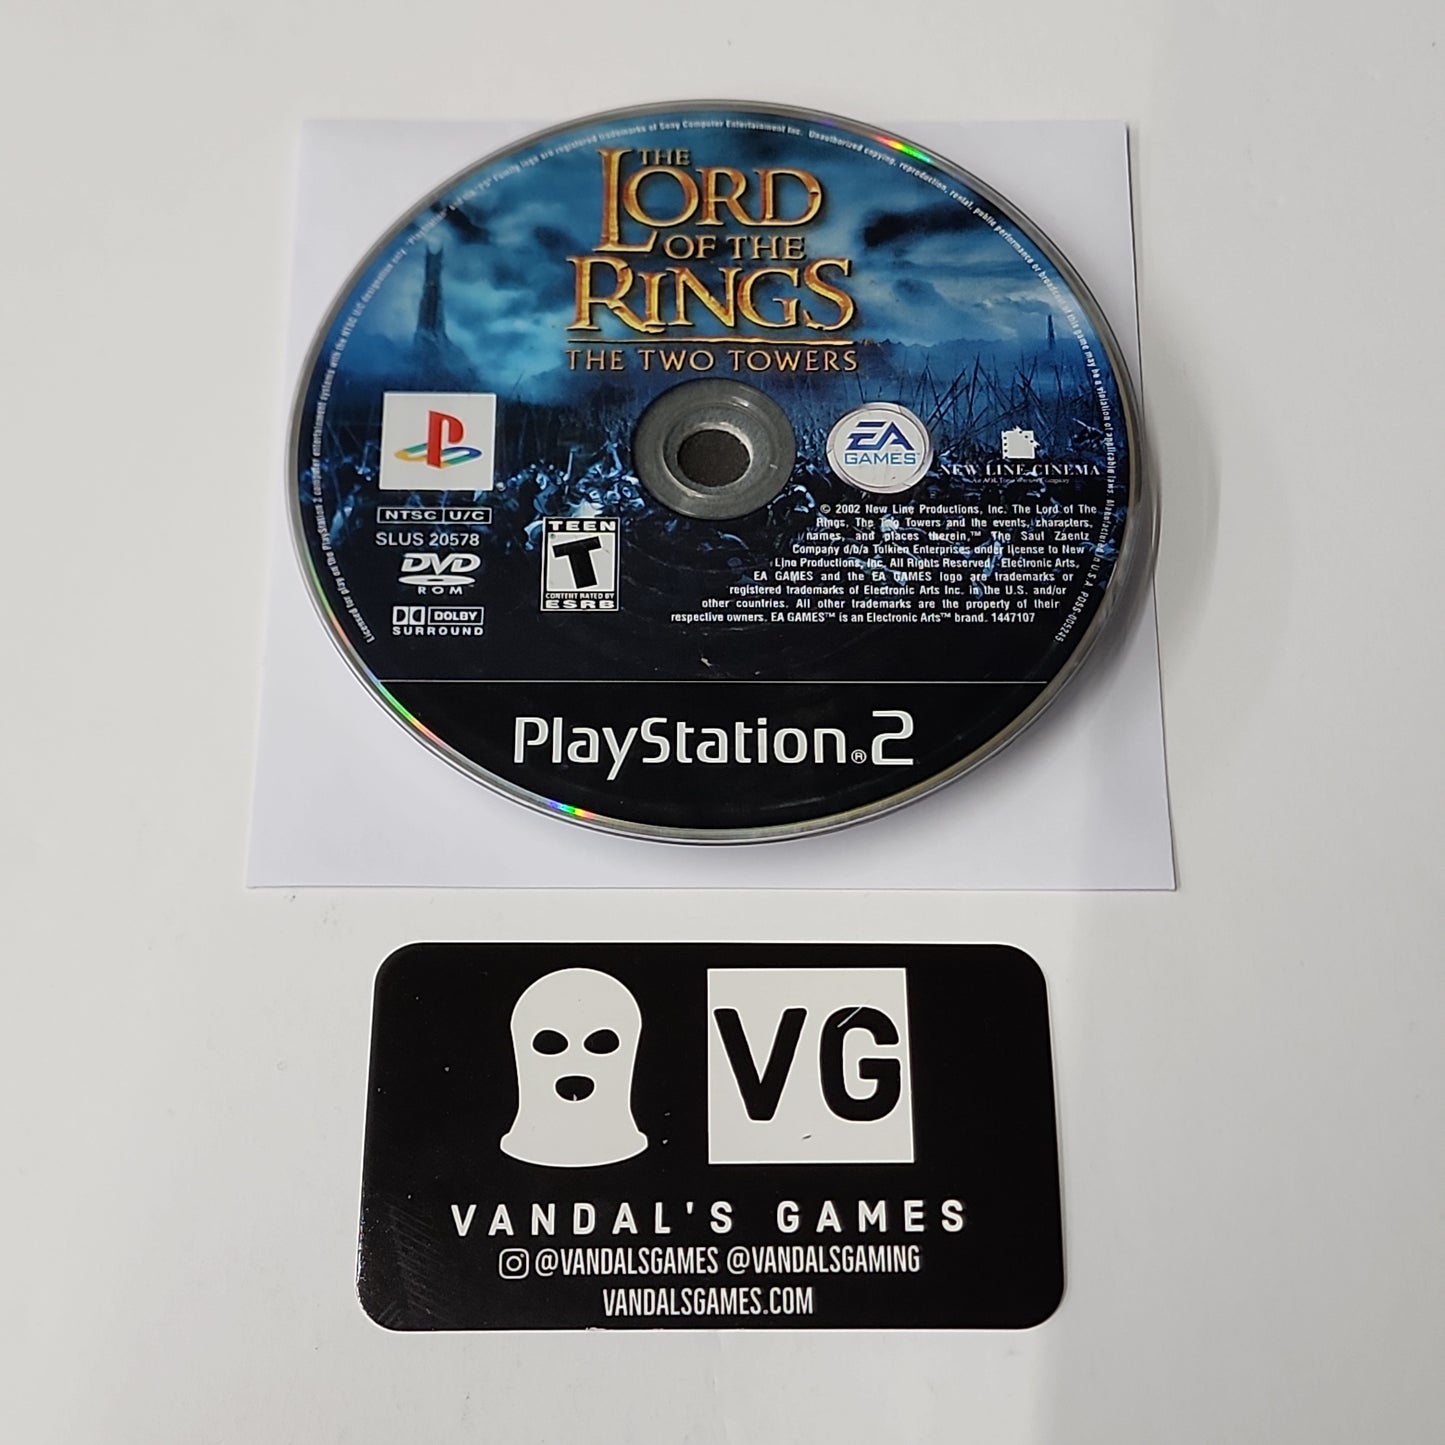 Ps2 - The Lord of the Rings The Two Towers Sony PlayStation 2 Disc Only #111